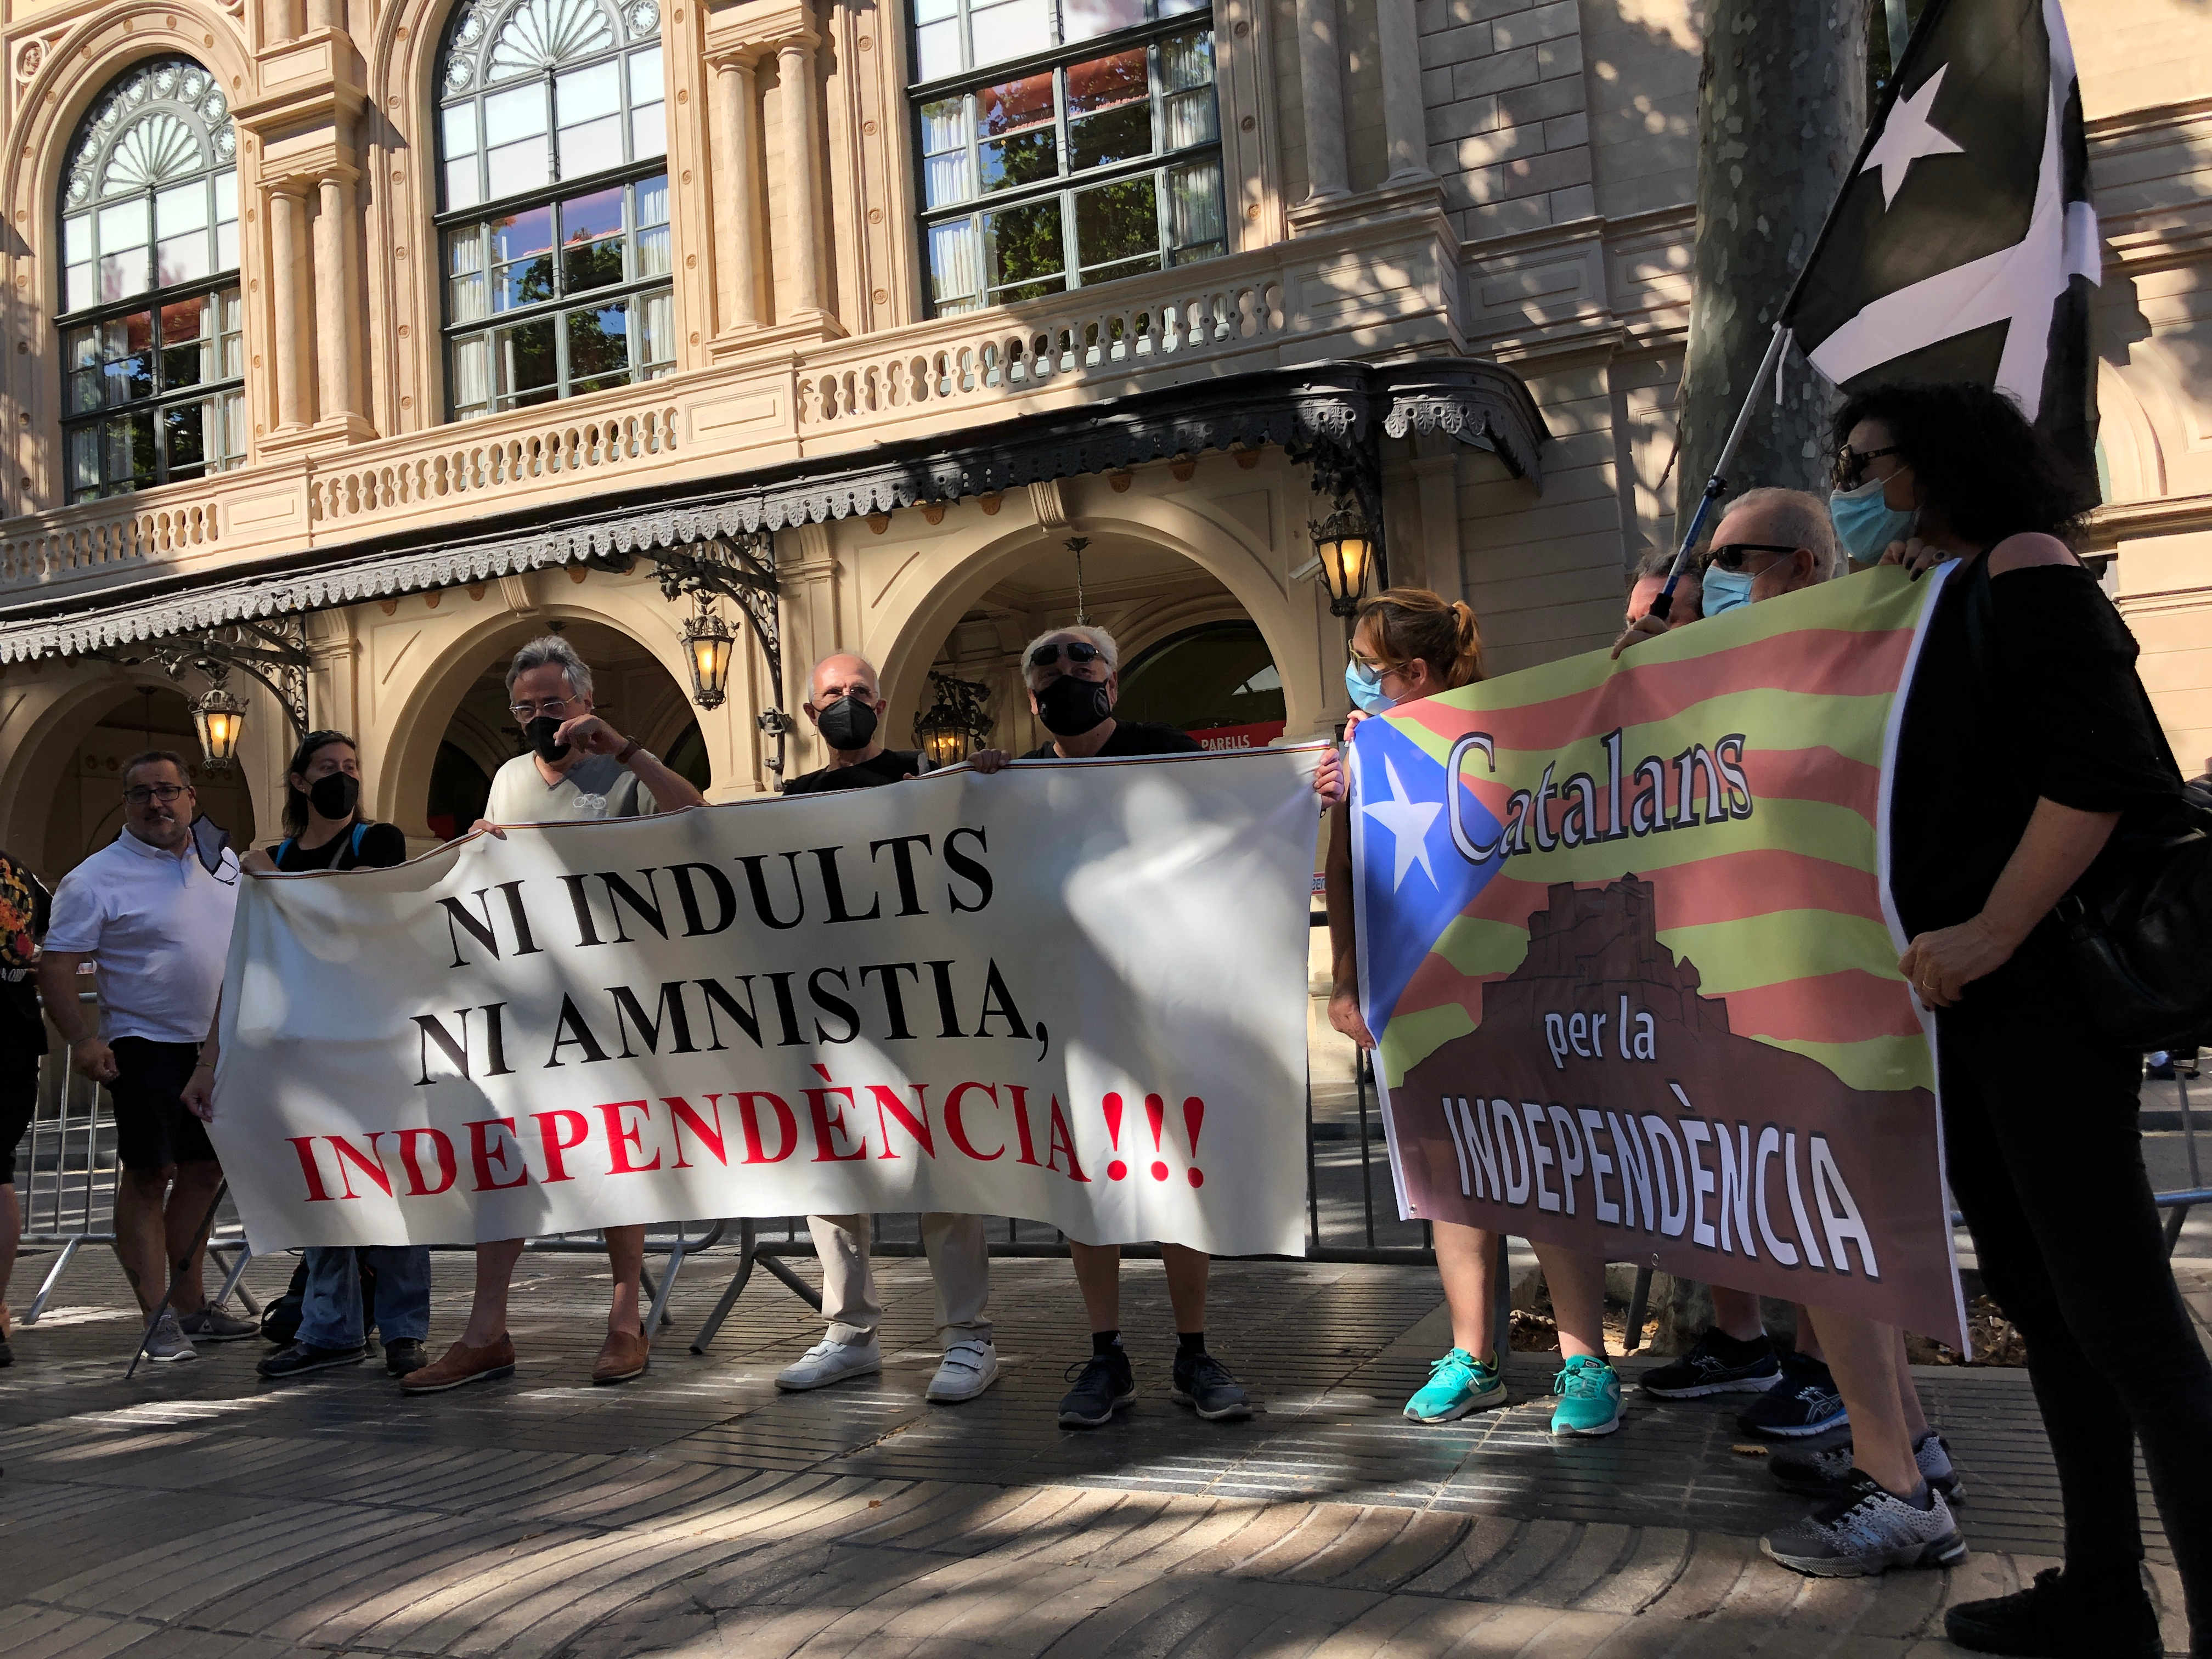 Pro-independence protesters in front of the Liceu opera house (by ACN)